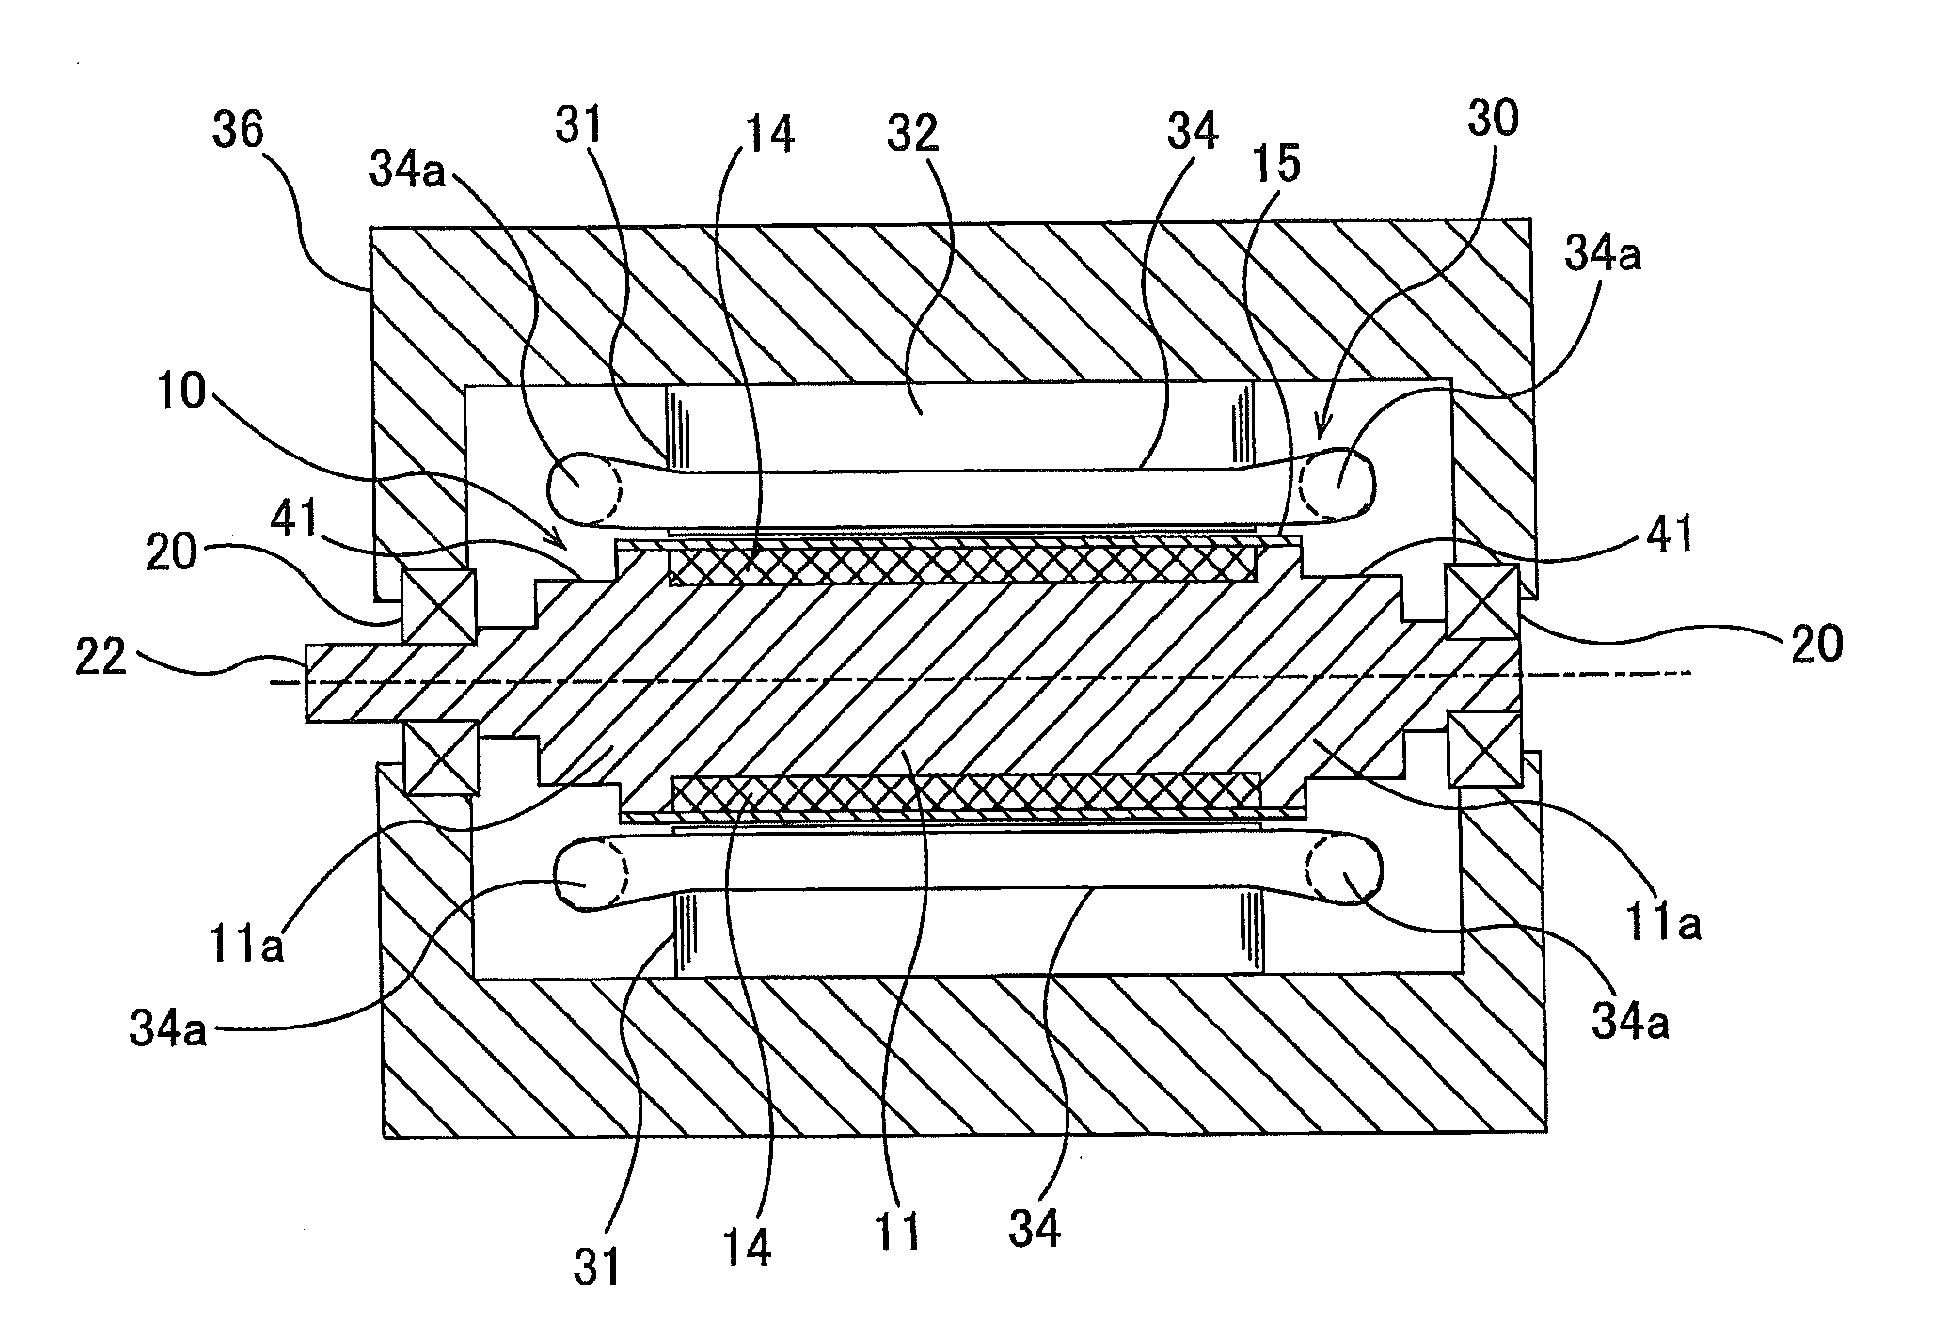 Rotary electrical machine having permanent magnet rotor